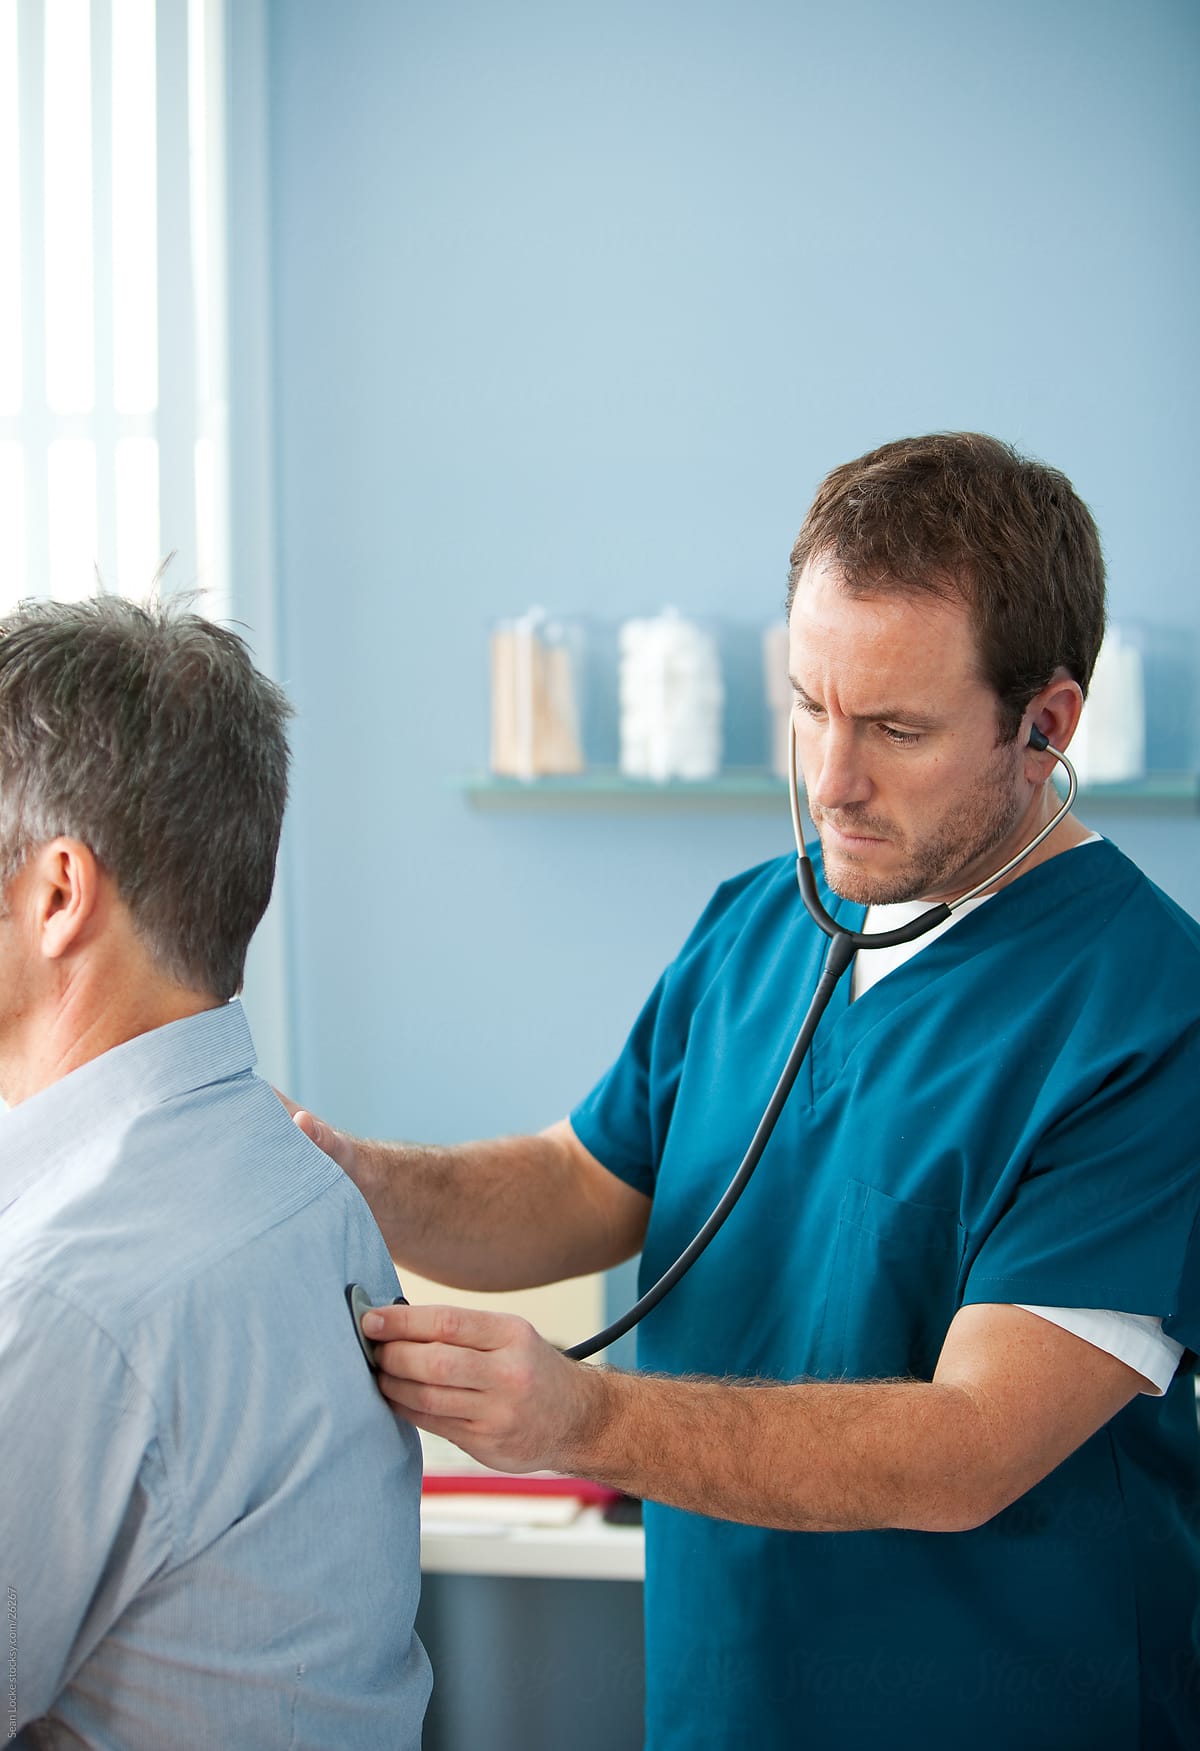 Exam Room: Male Nurse with Patient